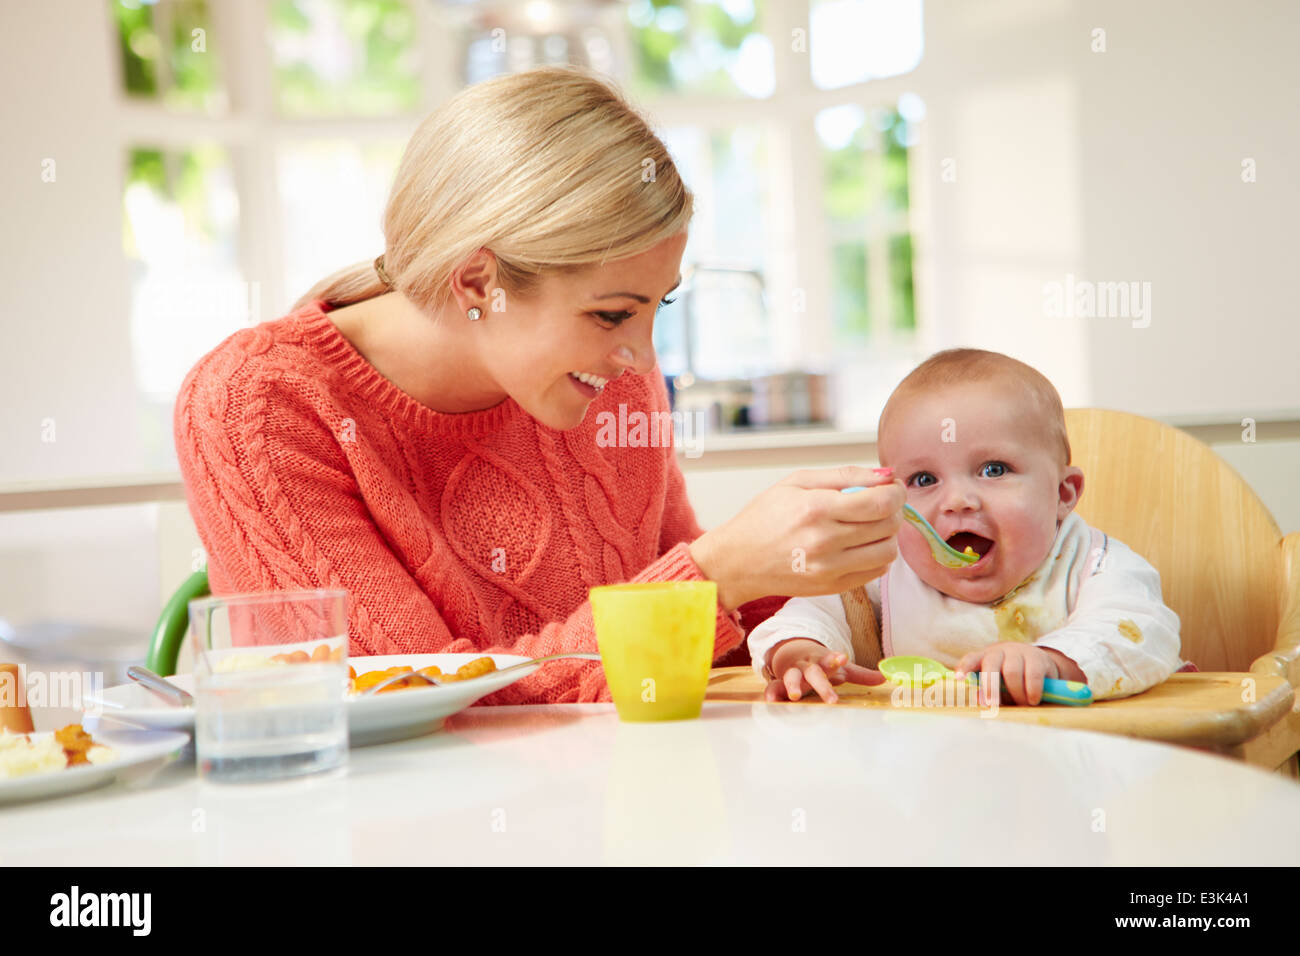 Mother Feeding Baby Sitting In High Chair At Mealtime Stock Photo